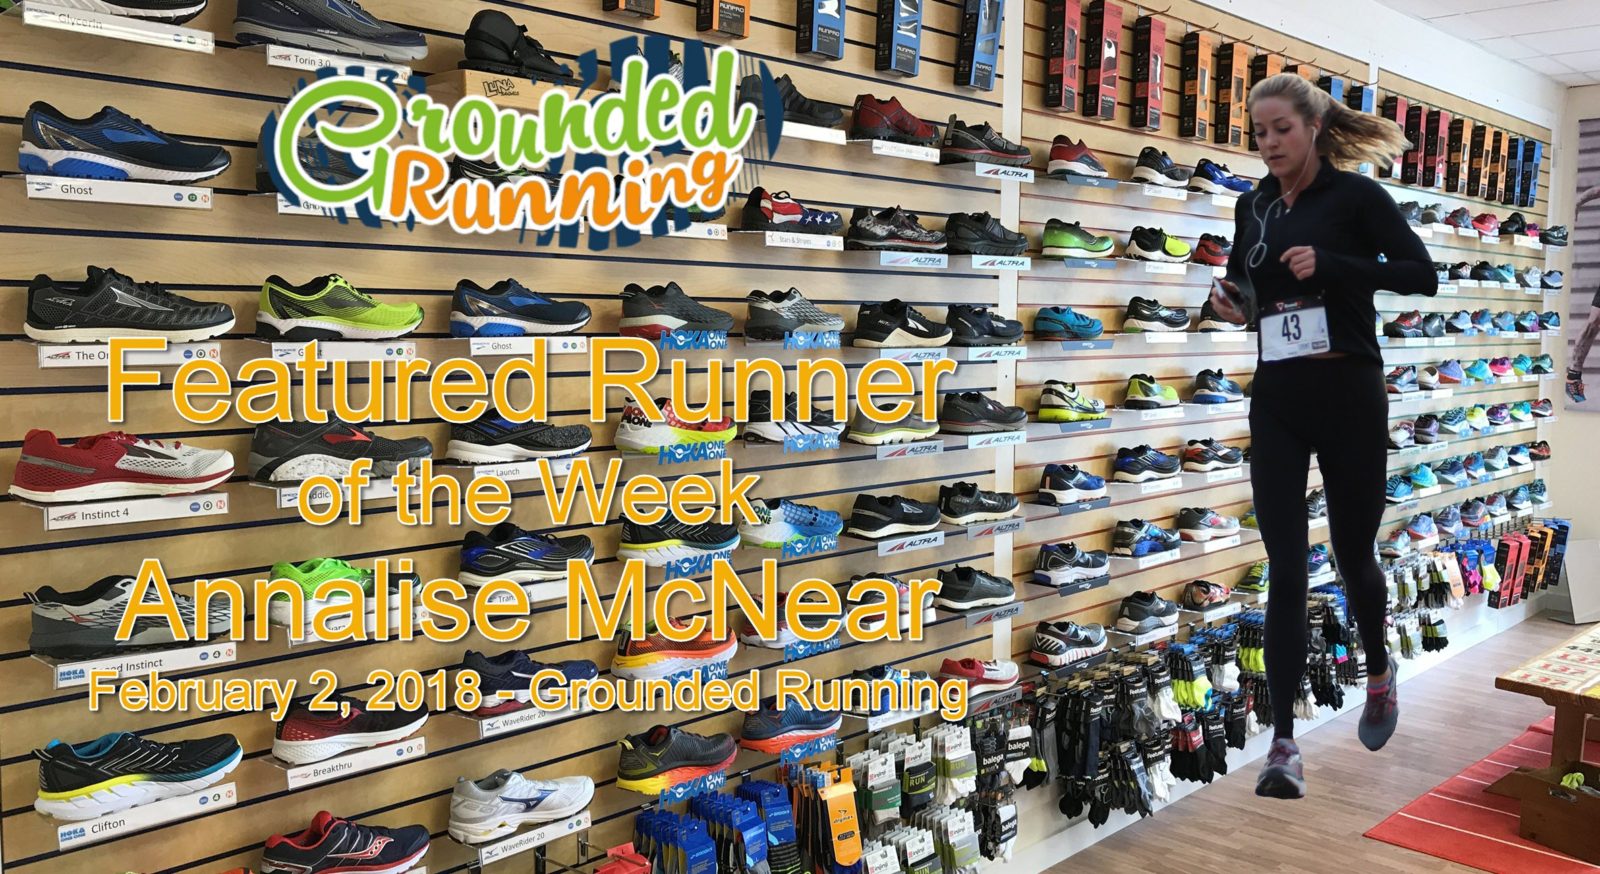 Annalise McNear - Featured Runner of the Week